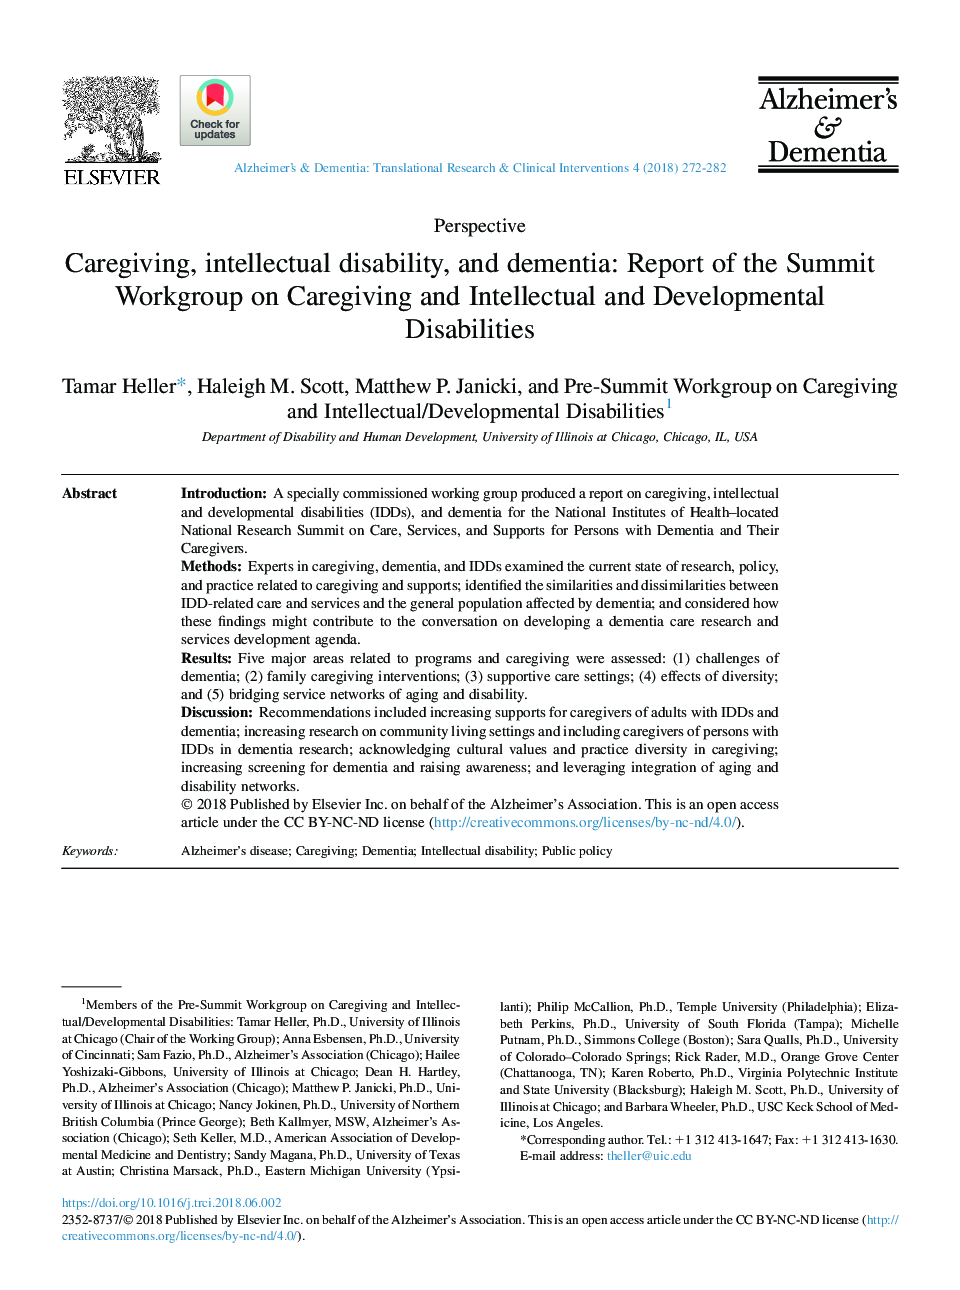 Caregiving, intellectual disability, and dementia: Report of the Summit Workgroup on Caregiving and Intellectual and Developmental Disabilities